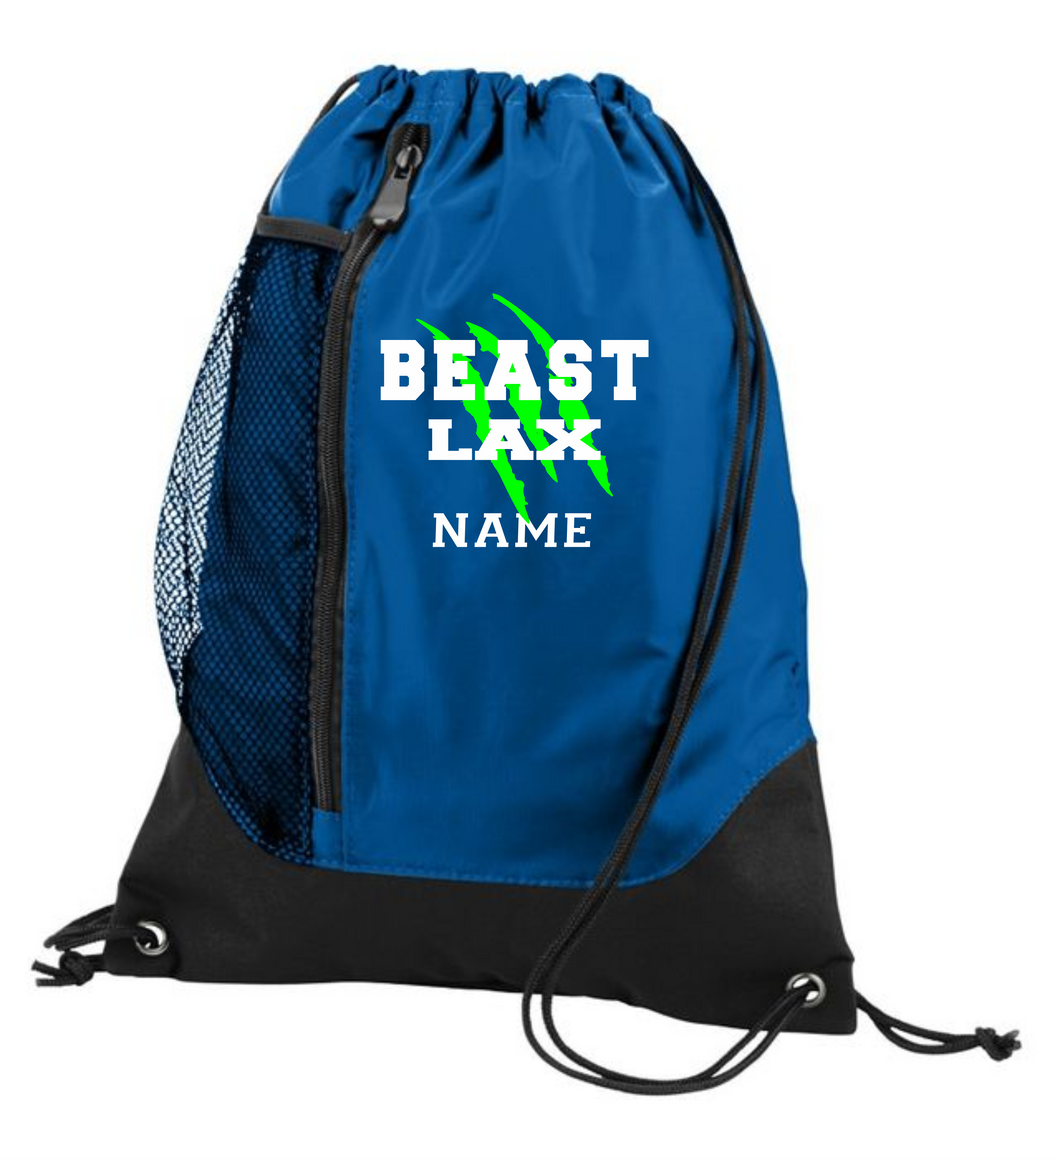 BEAST-LAX-950-2 - Augusta Tri-Color Drawstring Backpack - BEAST LAX Logo & Personalized Name